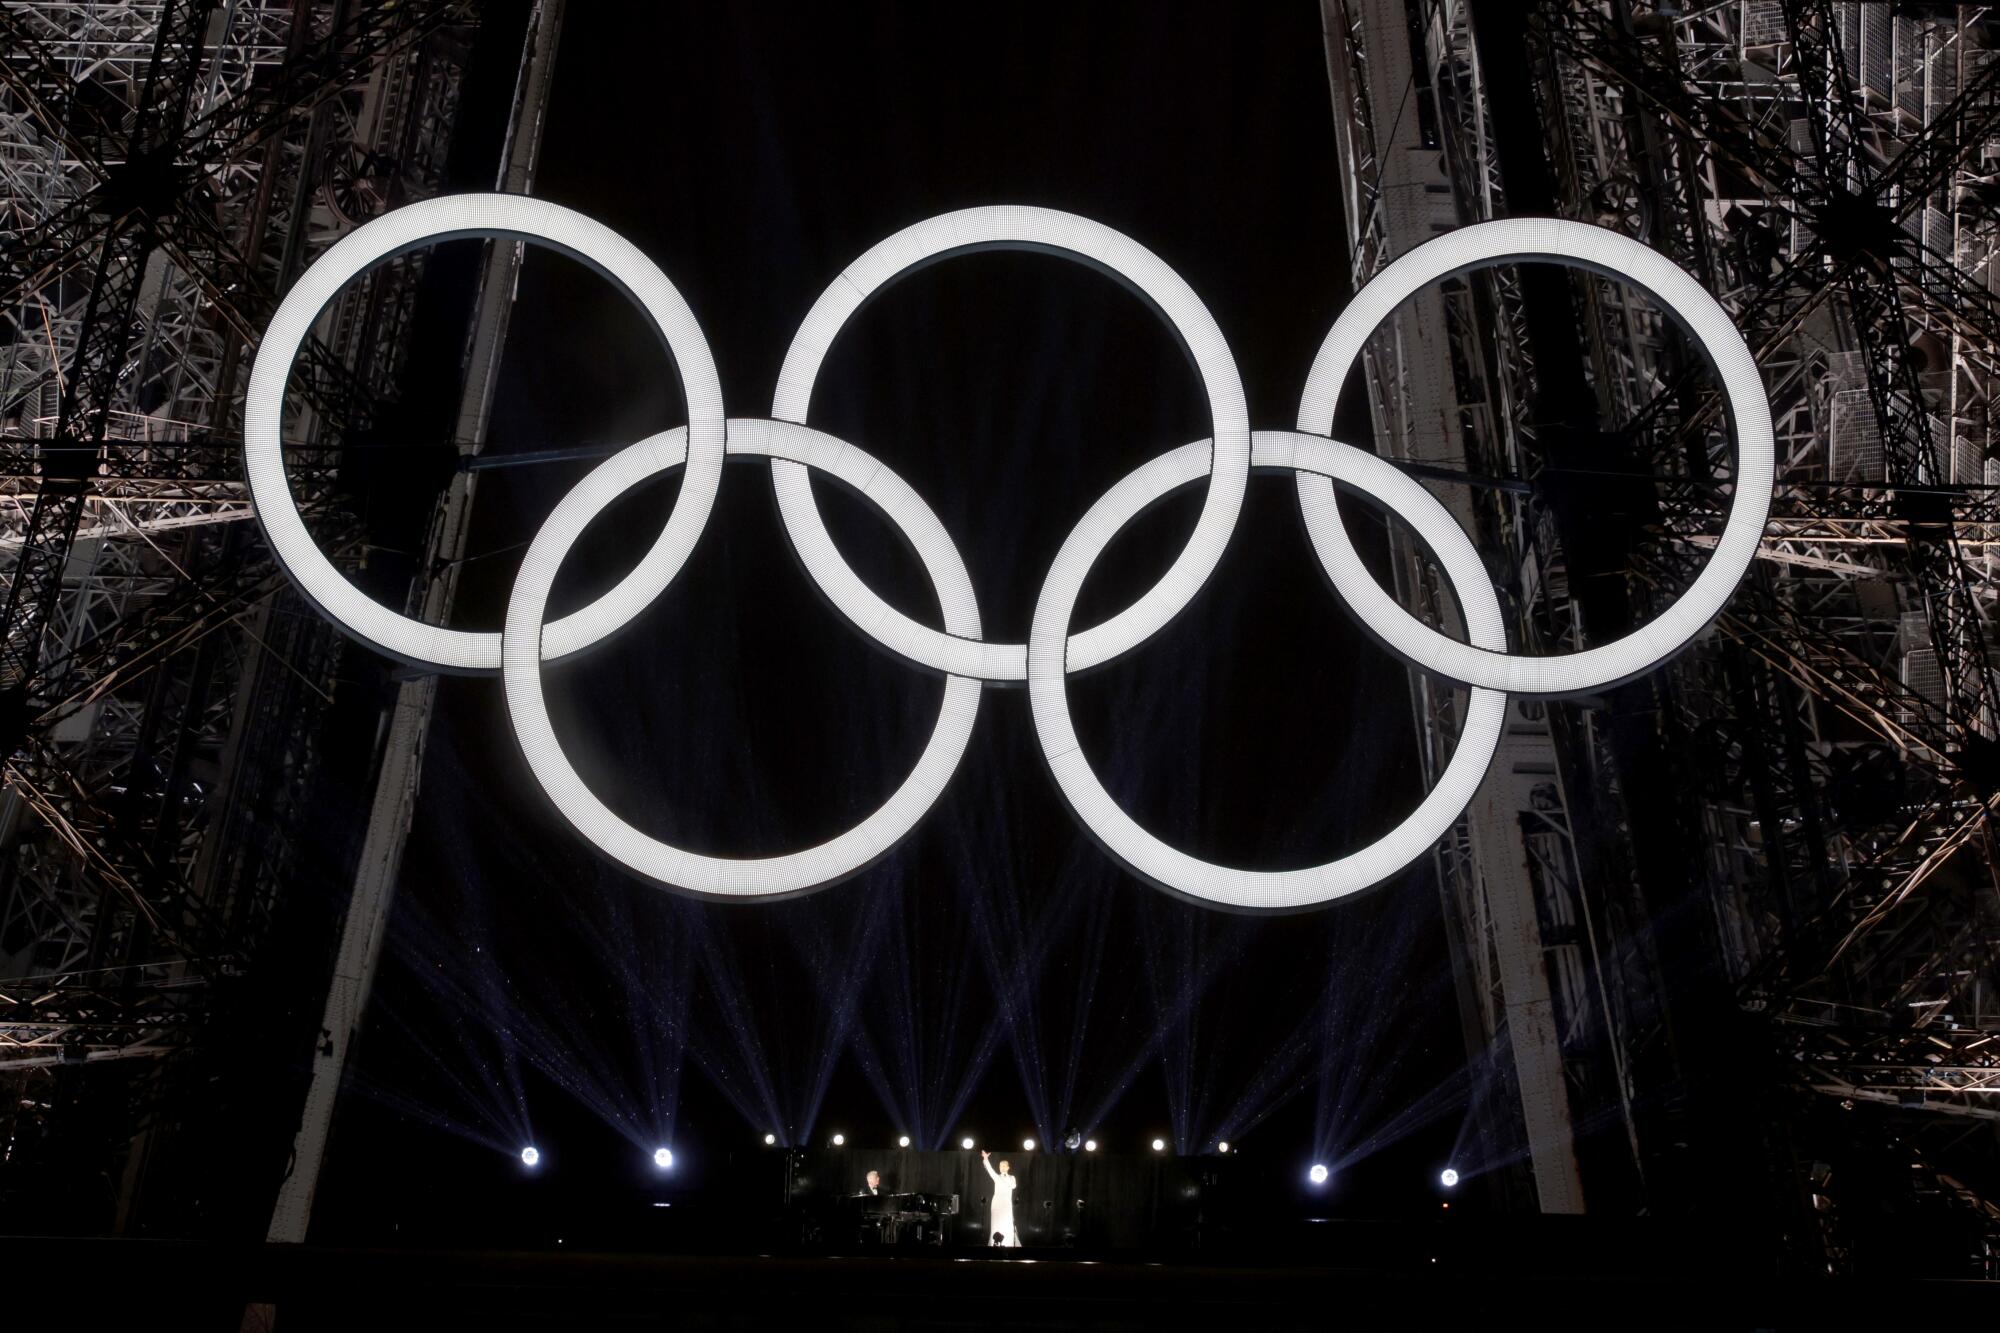 Canadian singer Celine Dion performs on the Eiffel Tower at the end of the Olympics opening ceremony on Friday.